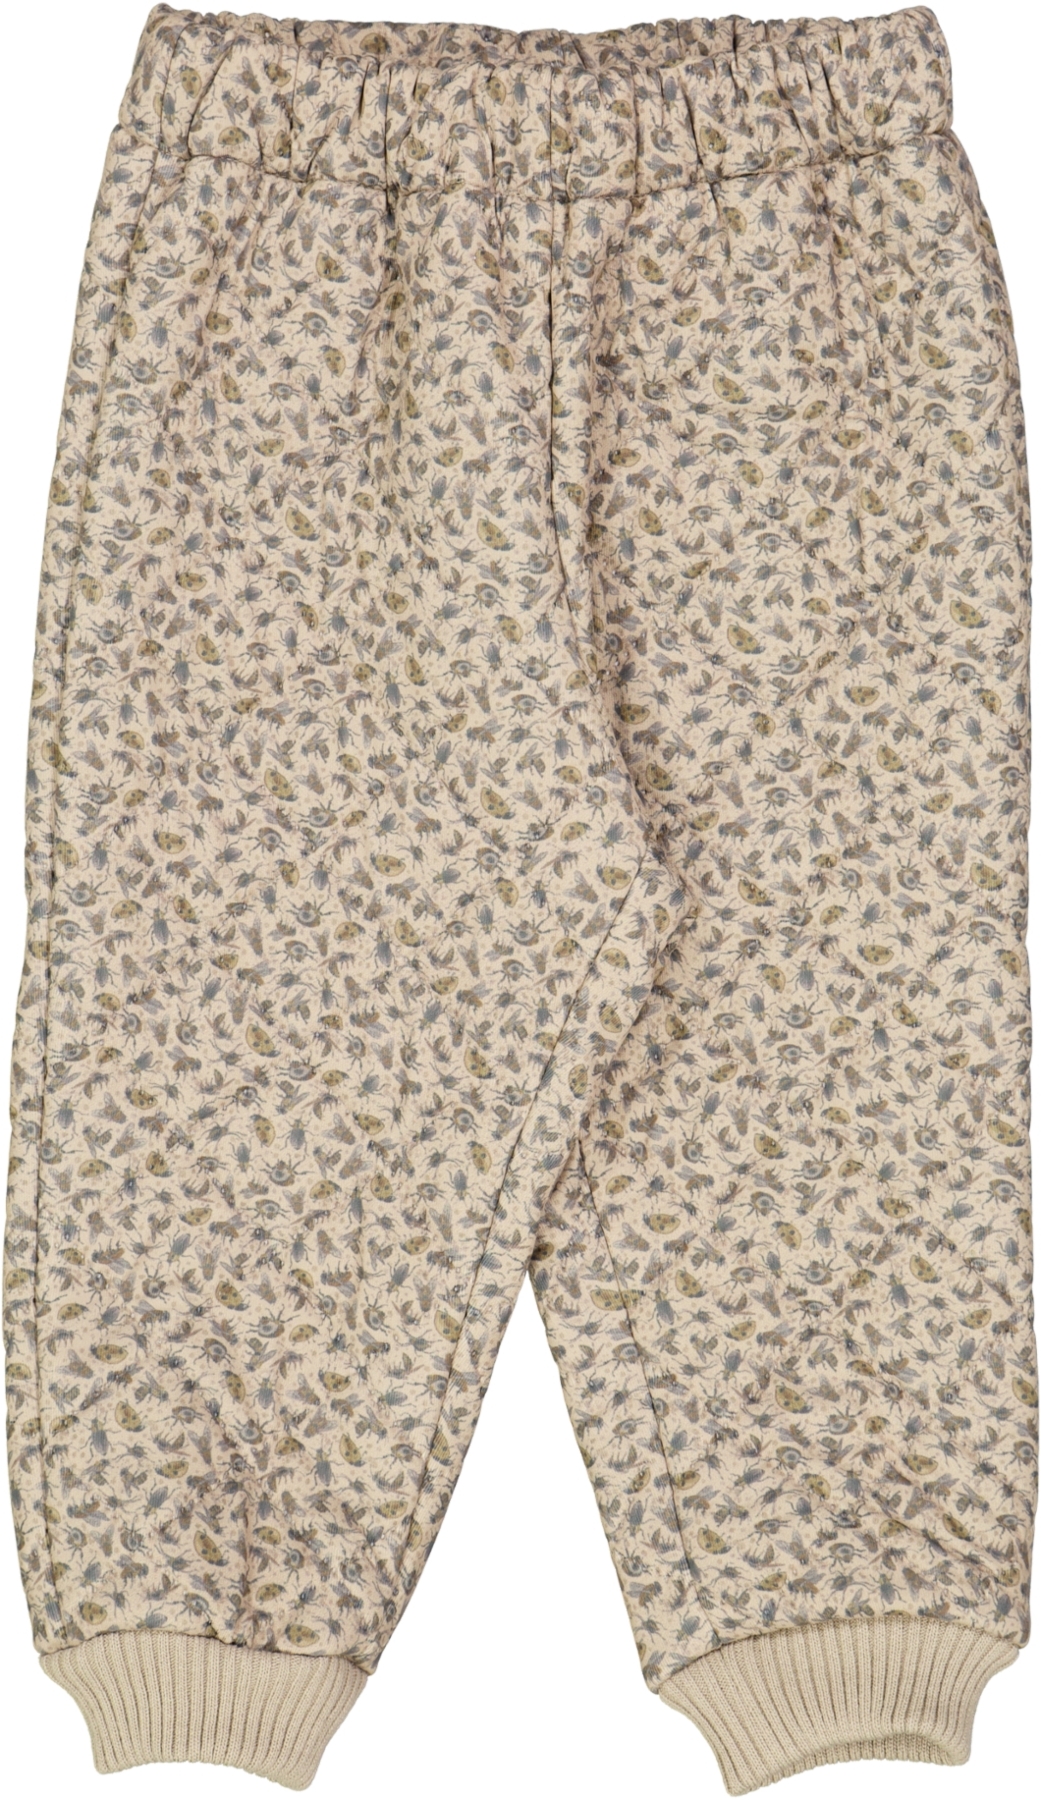 Jeffogjoy-wheat-termo pants-alex-8580h-982R-3133-watercolor-insects